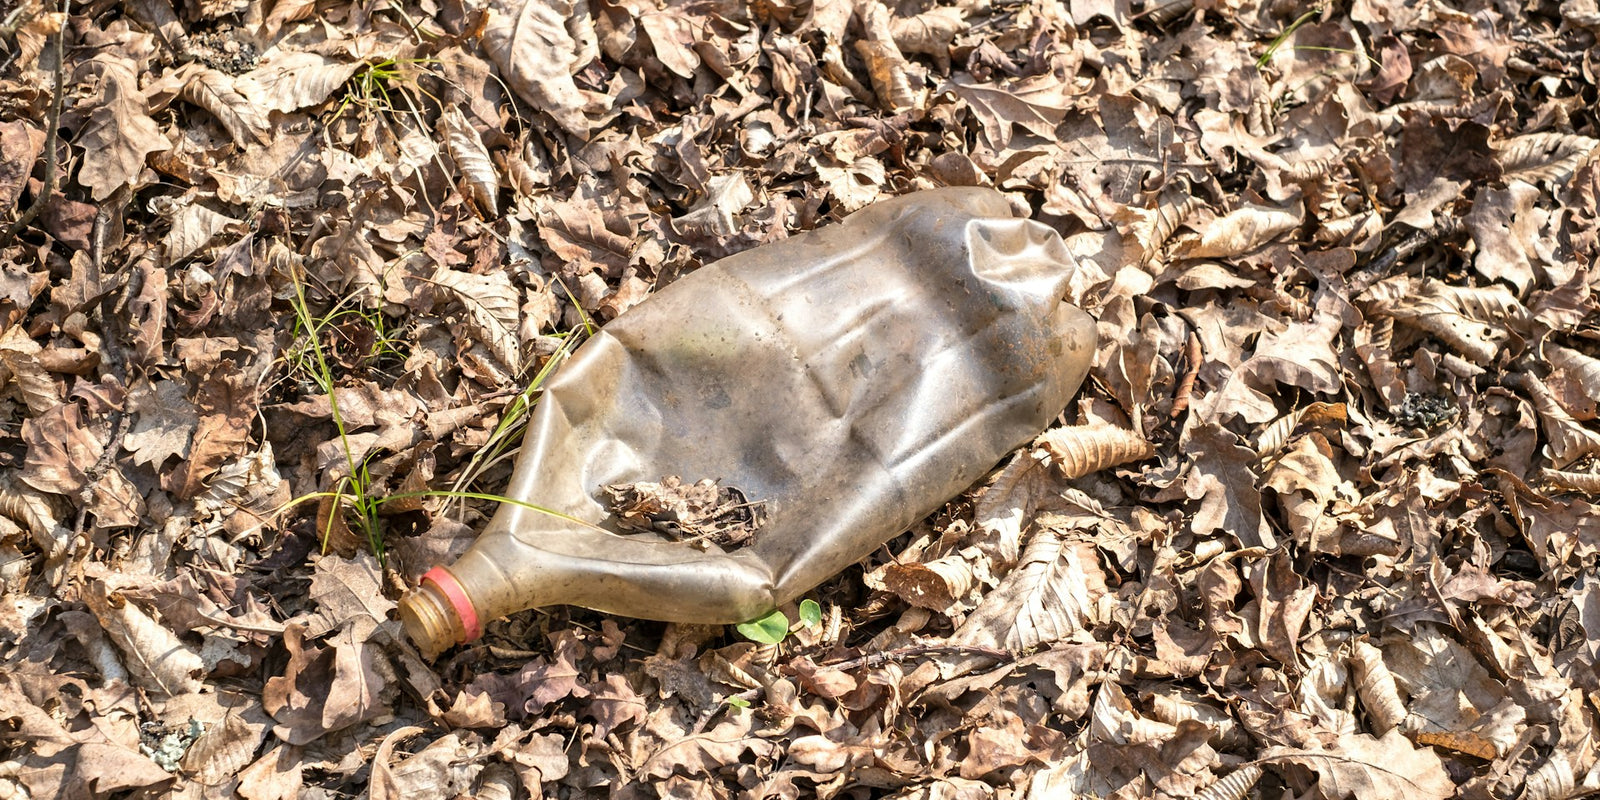 pet sustainability image, showing a plastic bottle left on the floor